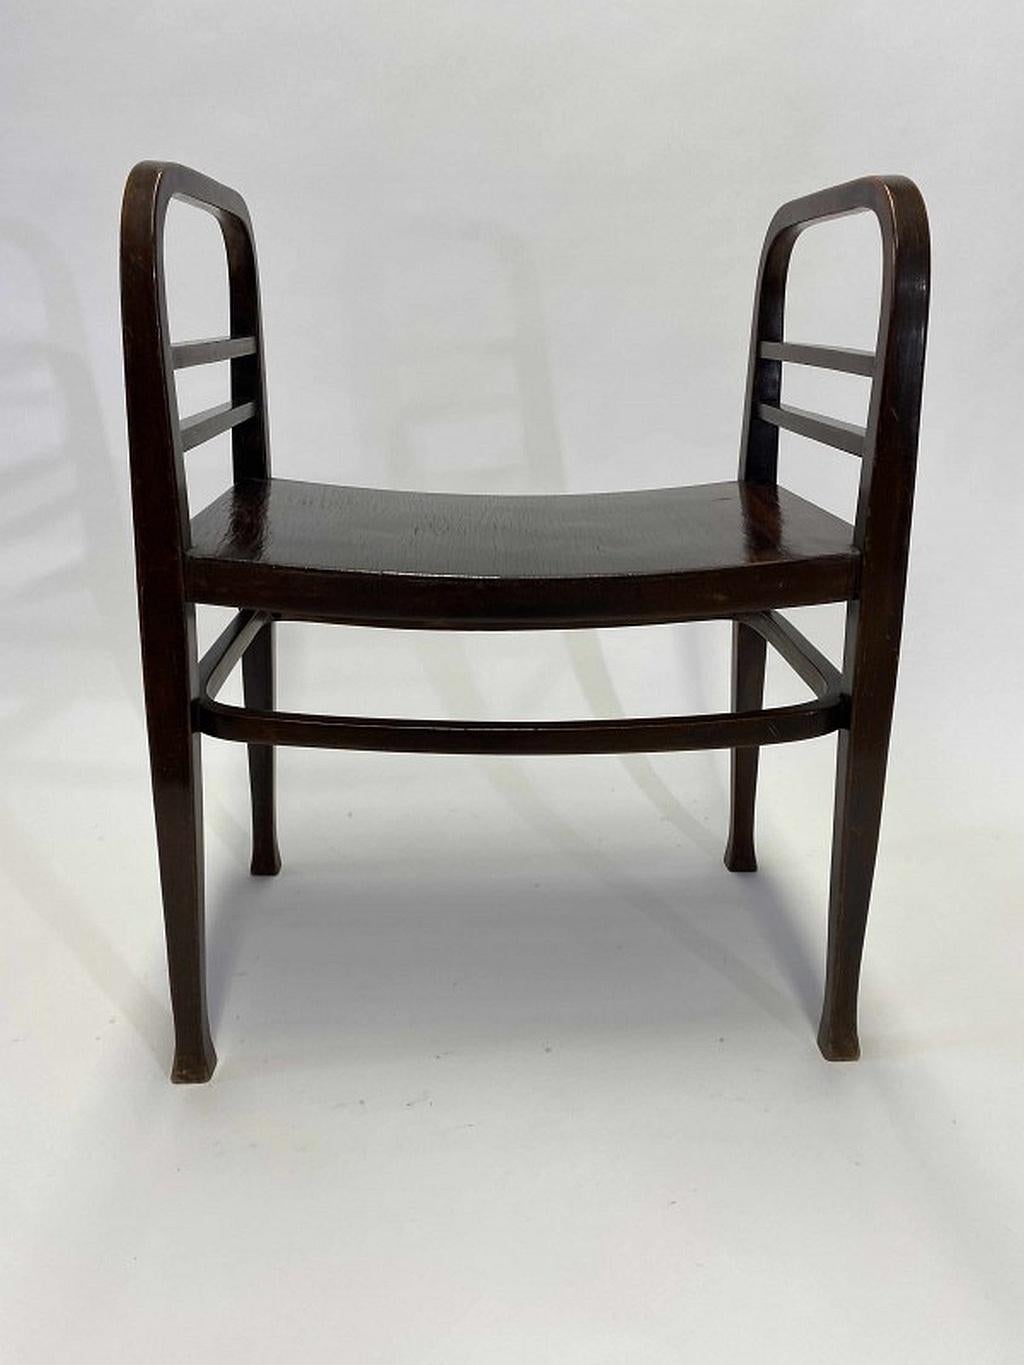 Vienna Secession Secession Causeuse No.6614 by Thonet Atr. Otto Wagner